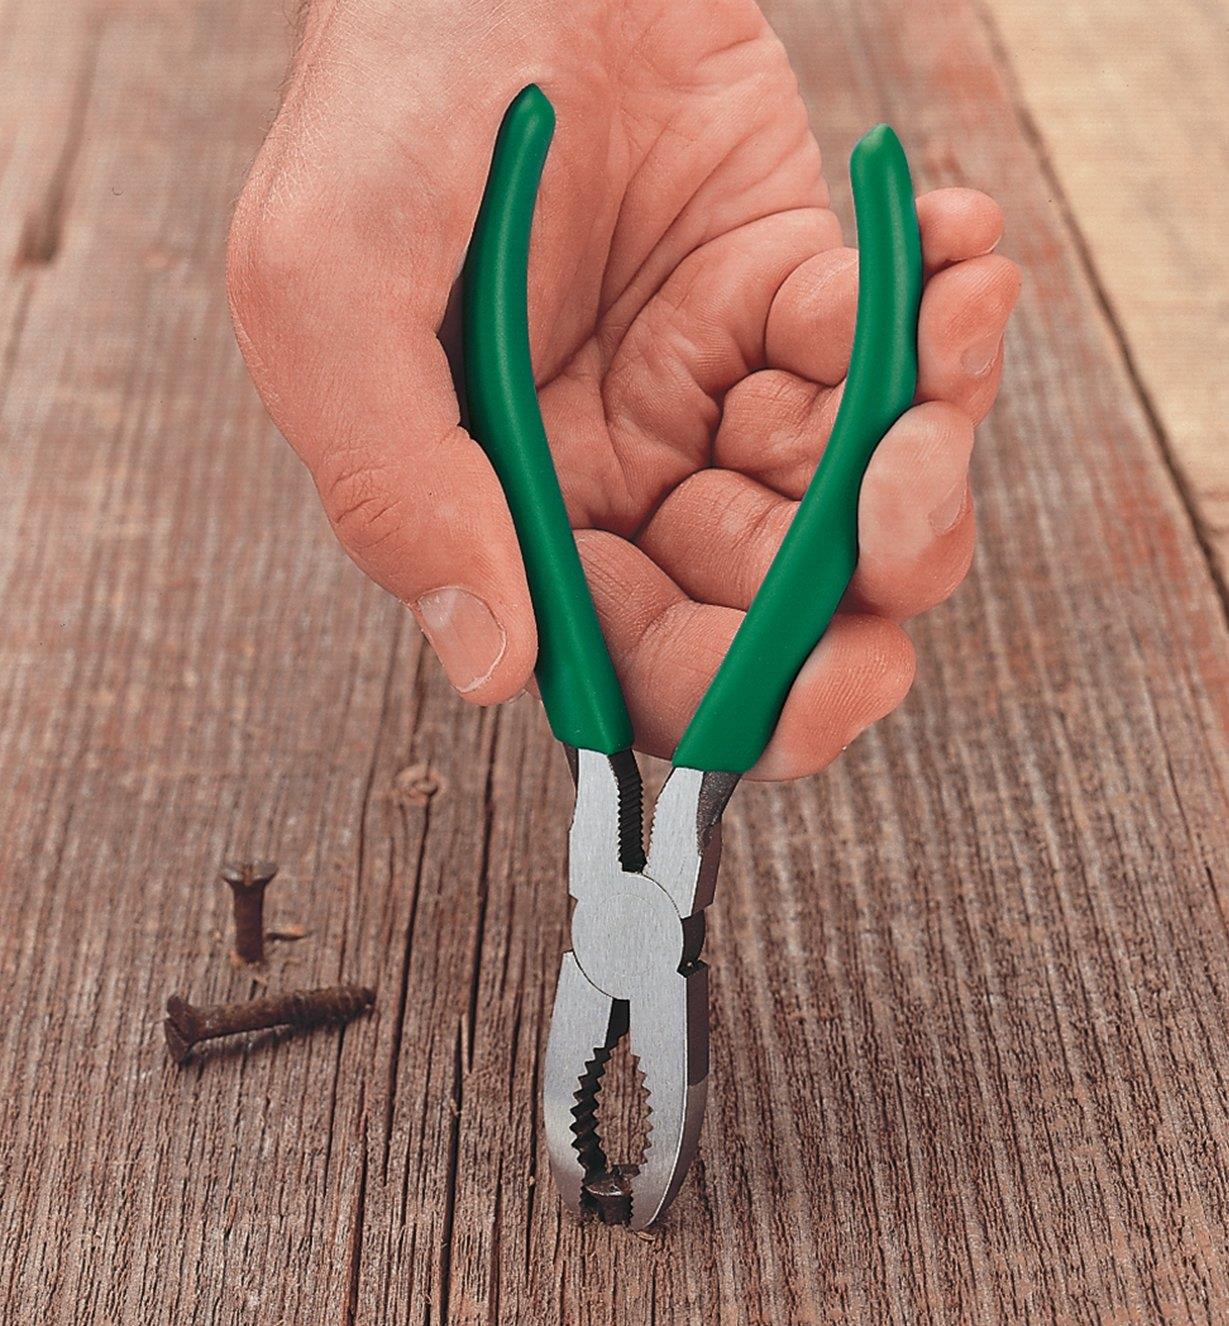 Using Screw Pliers to remove a screw from wood